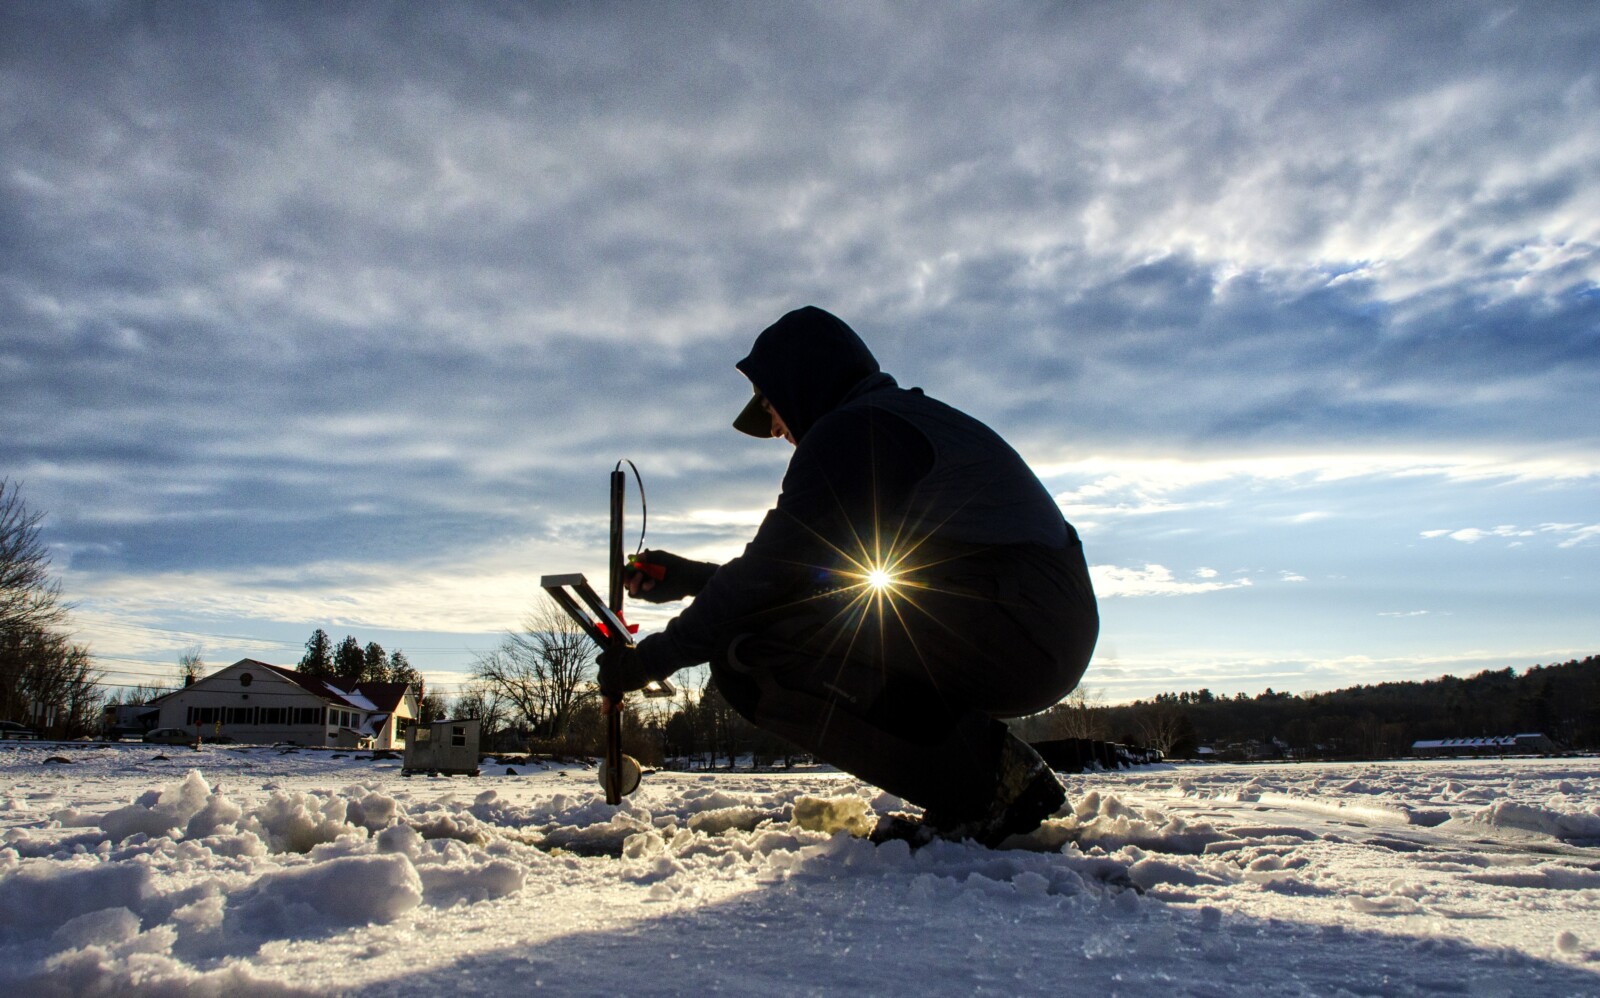 Want to give ice fishing a try this winter? Here are some tips